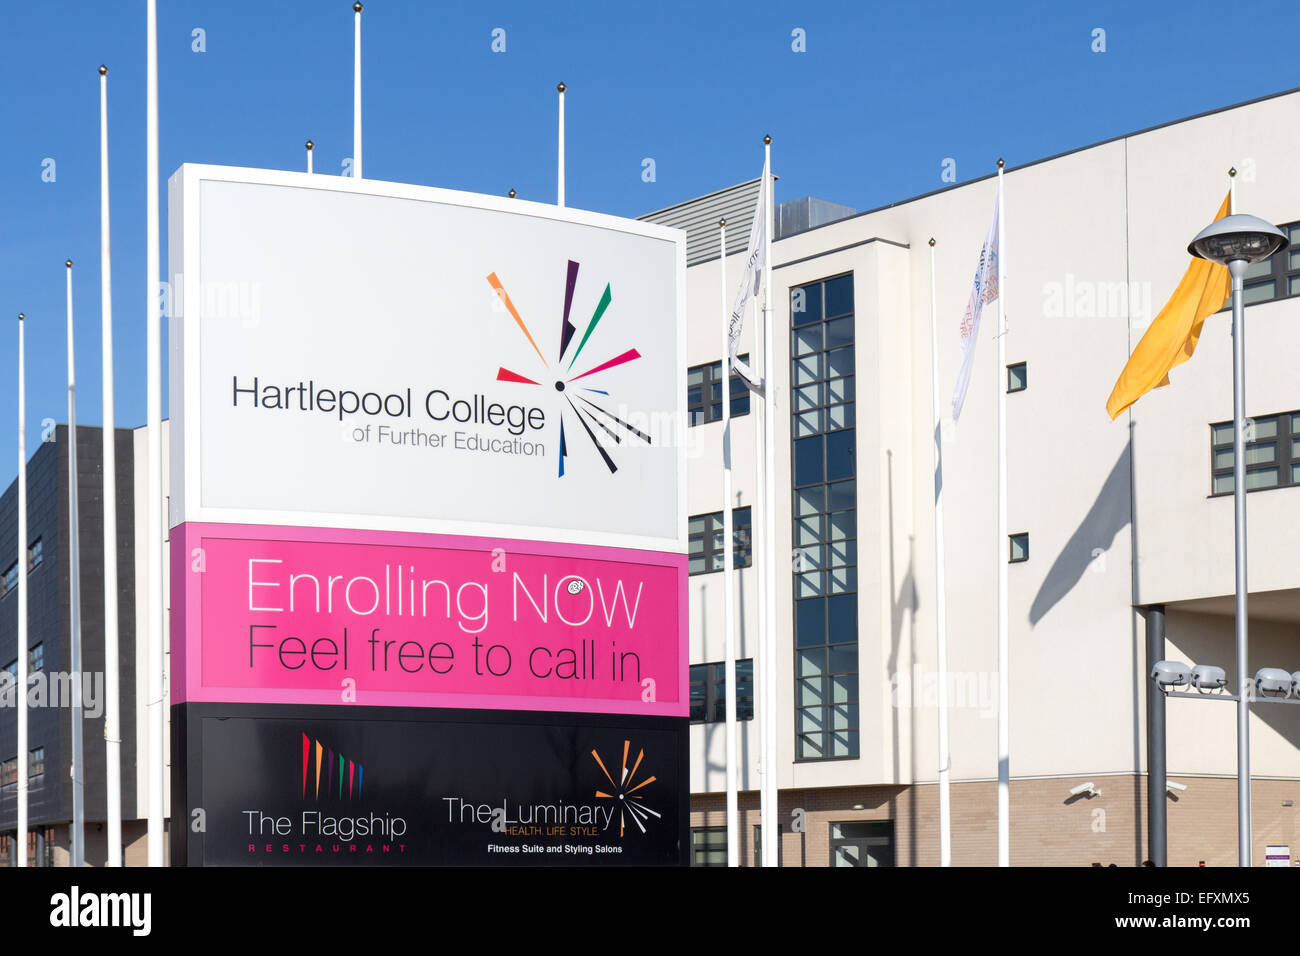 Hartlepool College of Further Education Stockfoto